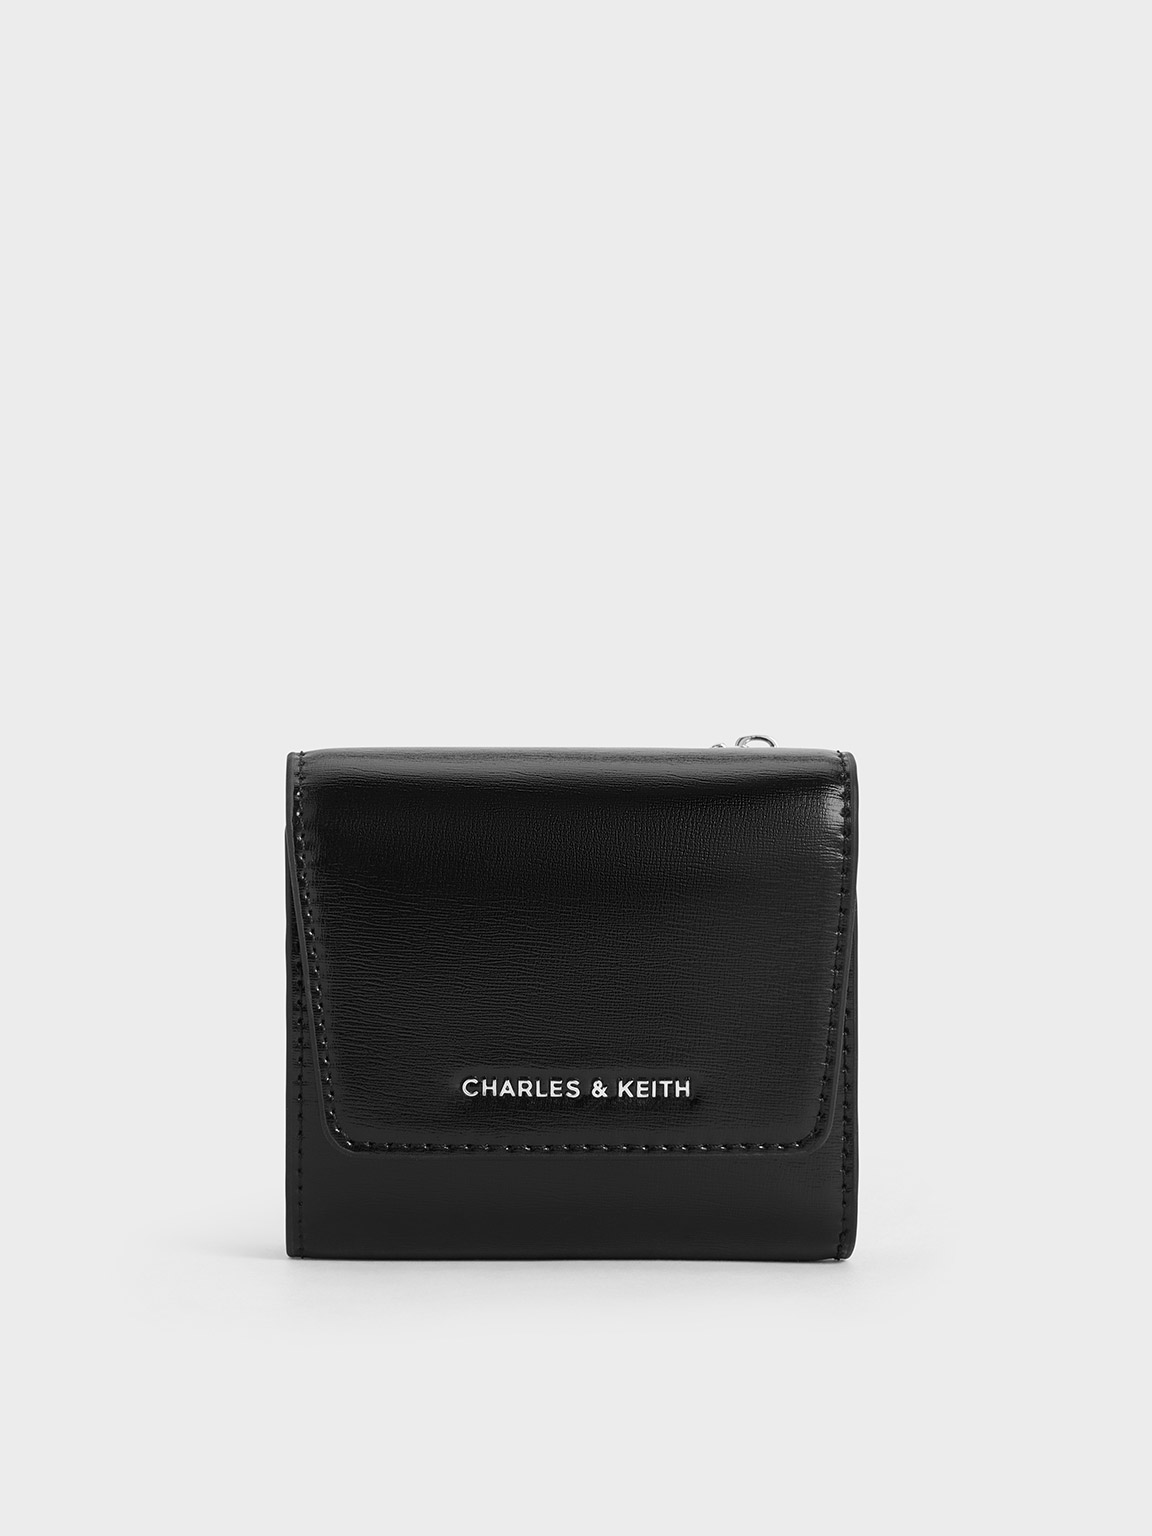 Charles & Keith Irie Small Wallet In Black